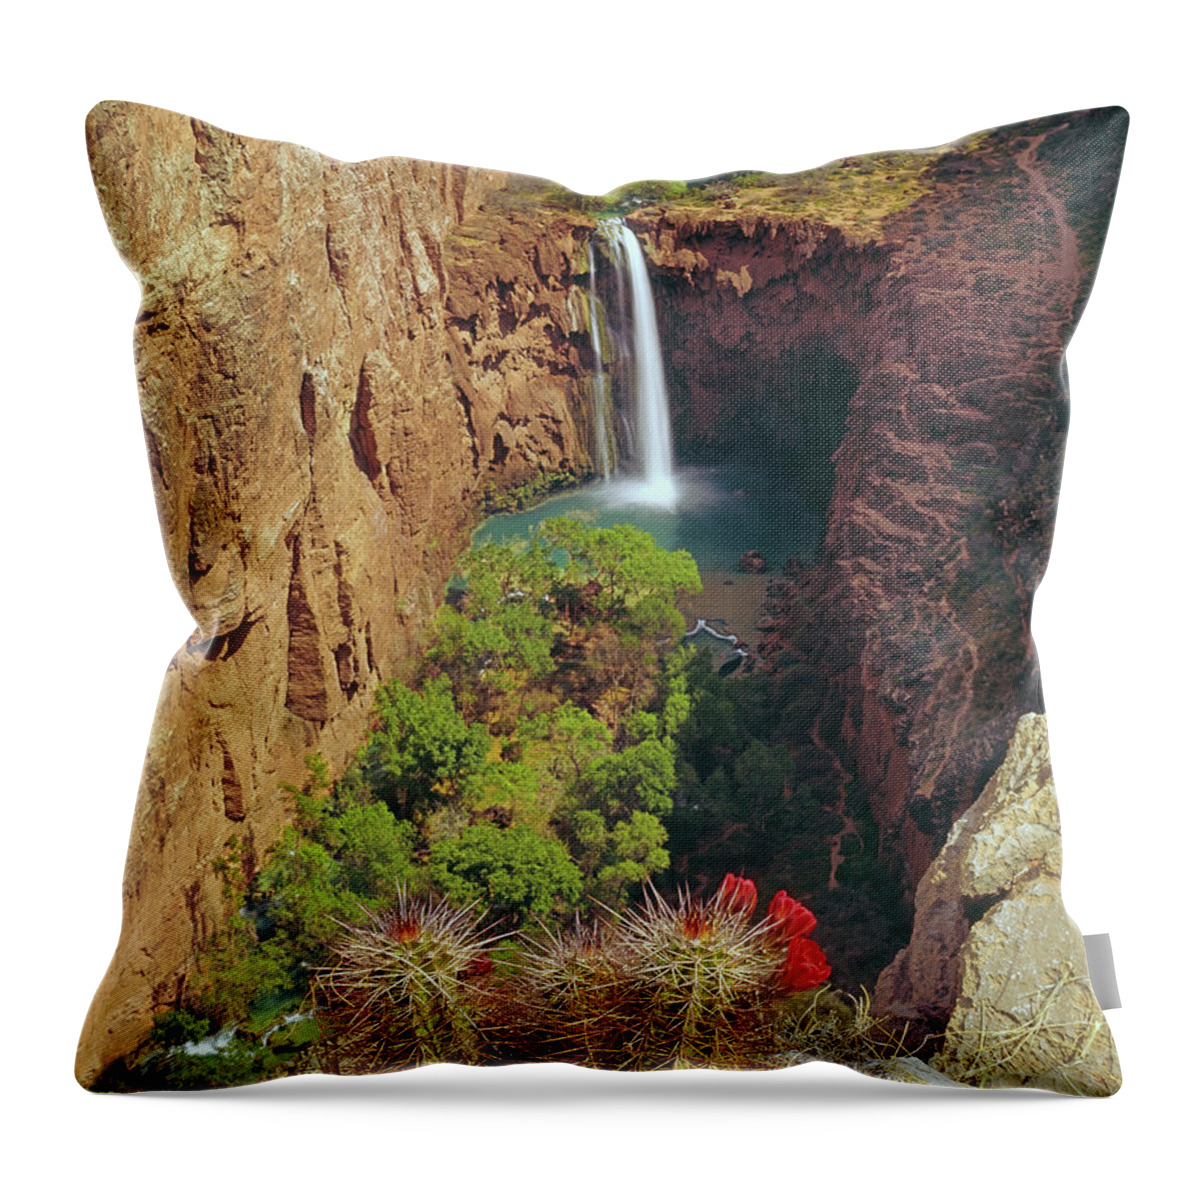 513216 Throw Pillow featuring the photograph 513216 Mooney Falls AZ by Ed Cooper Photography